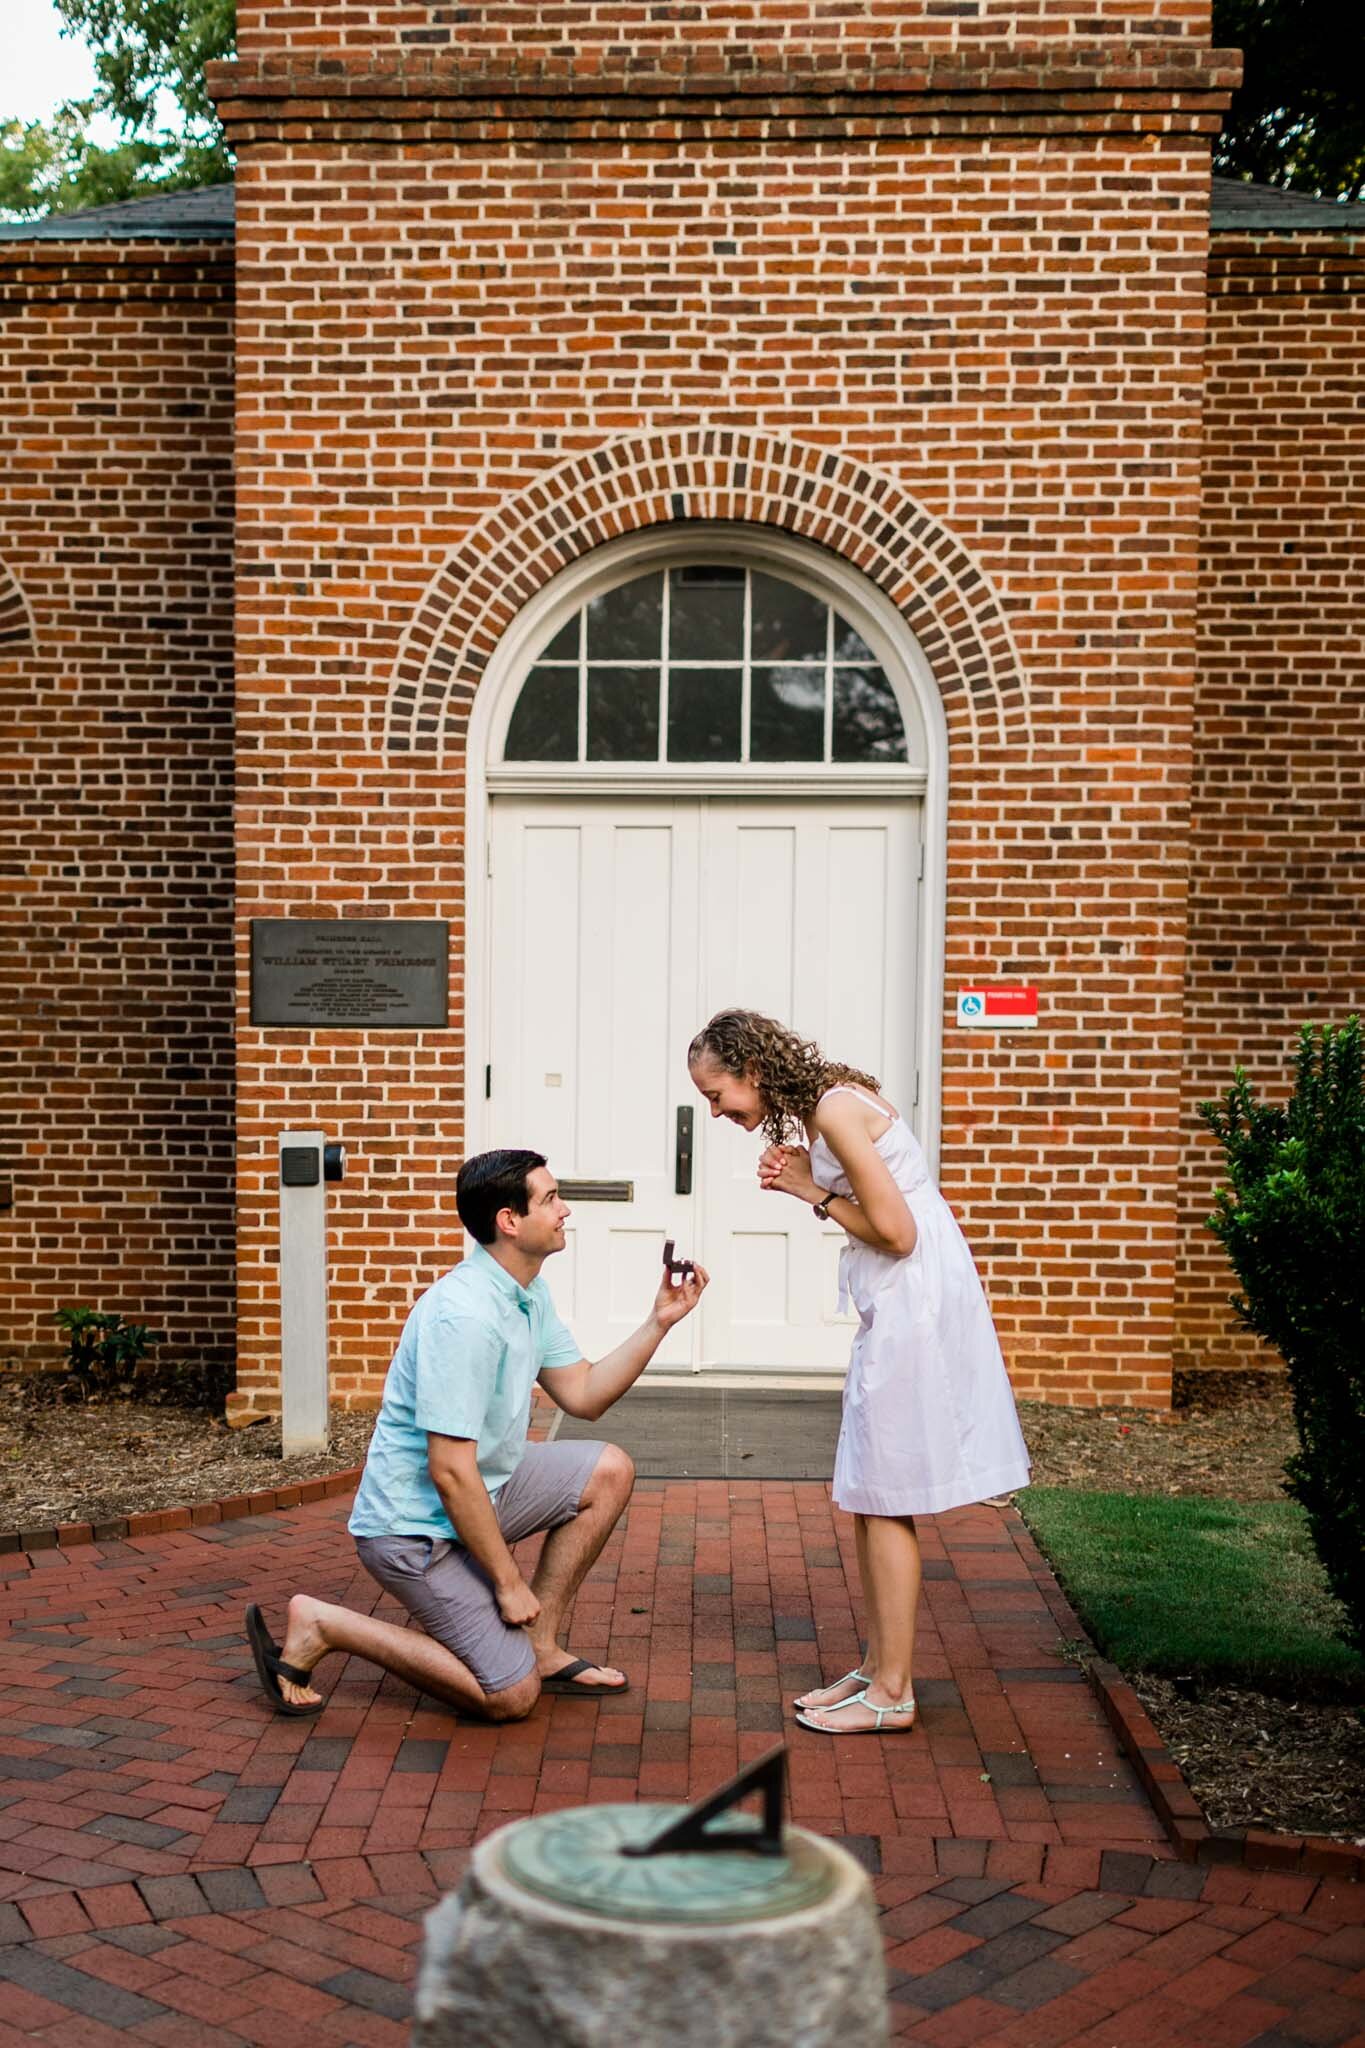 Raleigh Engagement Photographer | NC State University | By G. Lin Photography | Man offering engagement ring to woman